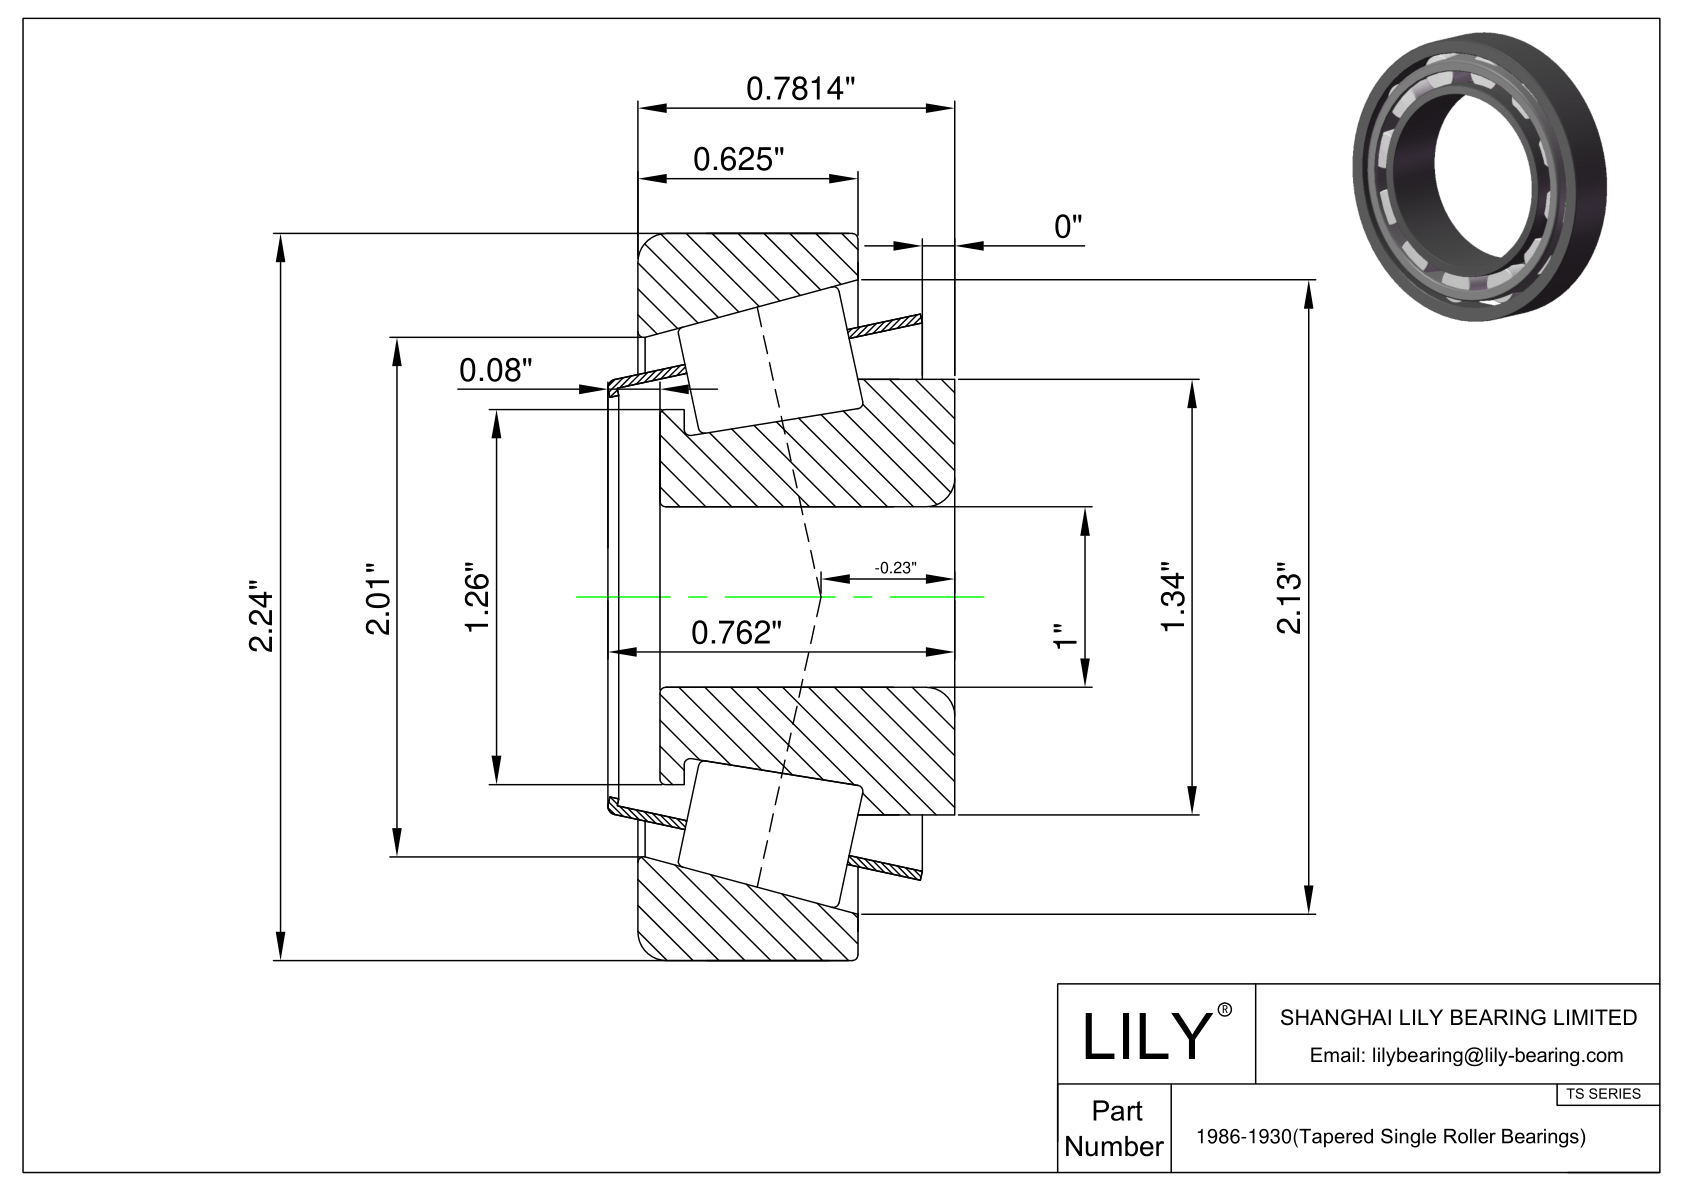 1986-1930 TS (Tapered Single Roller Bearings) (Imperial) cad drawing